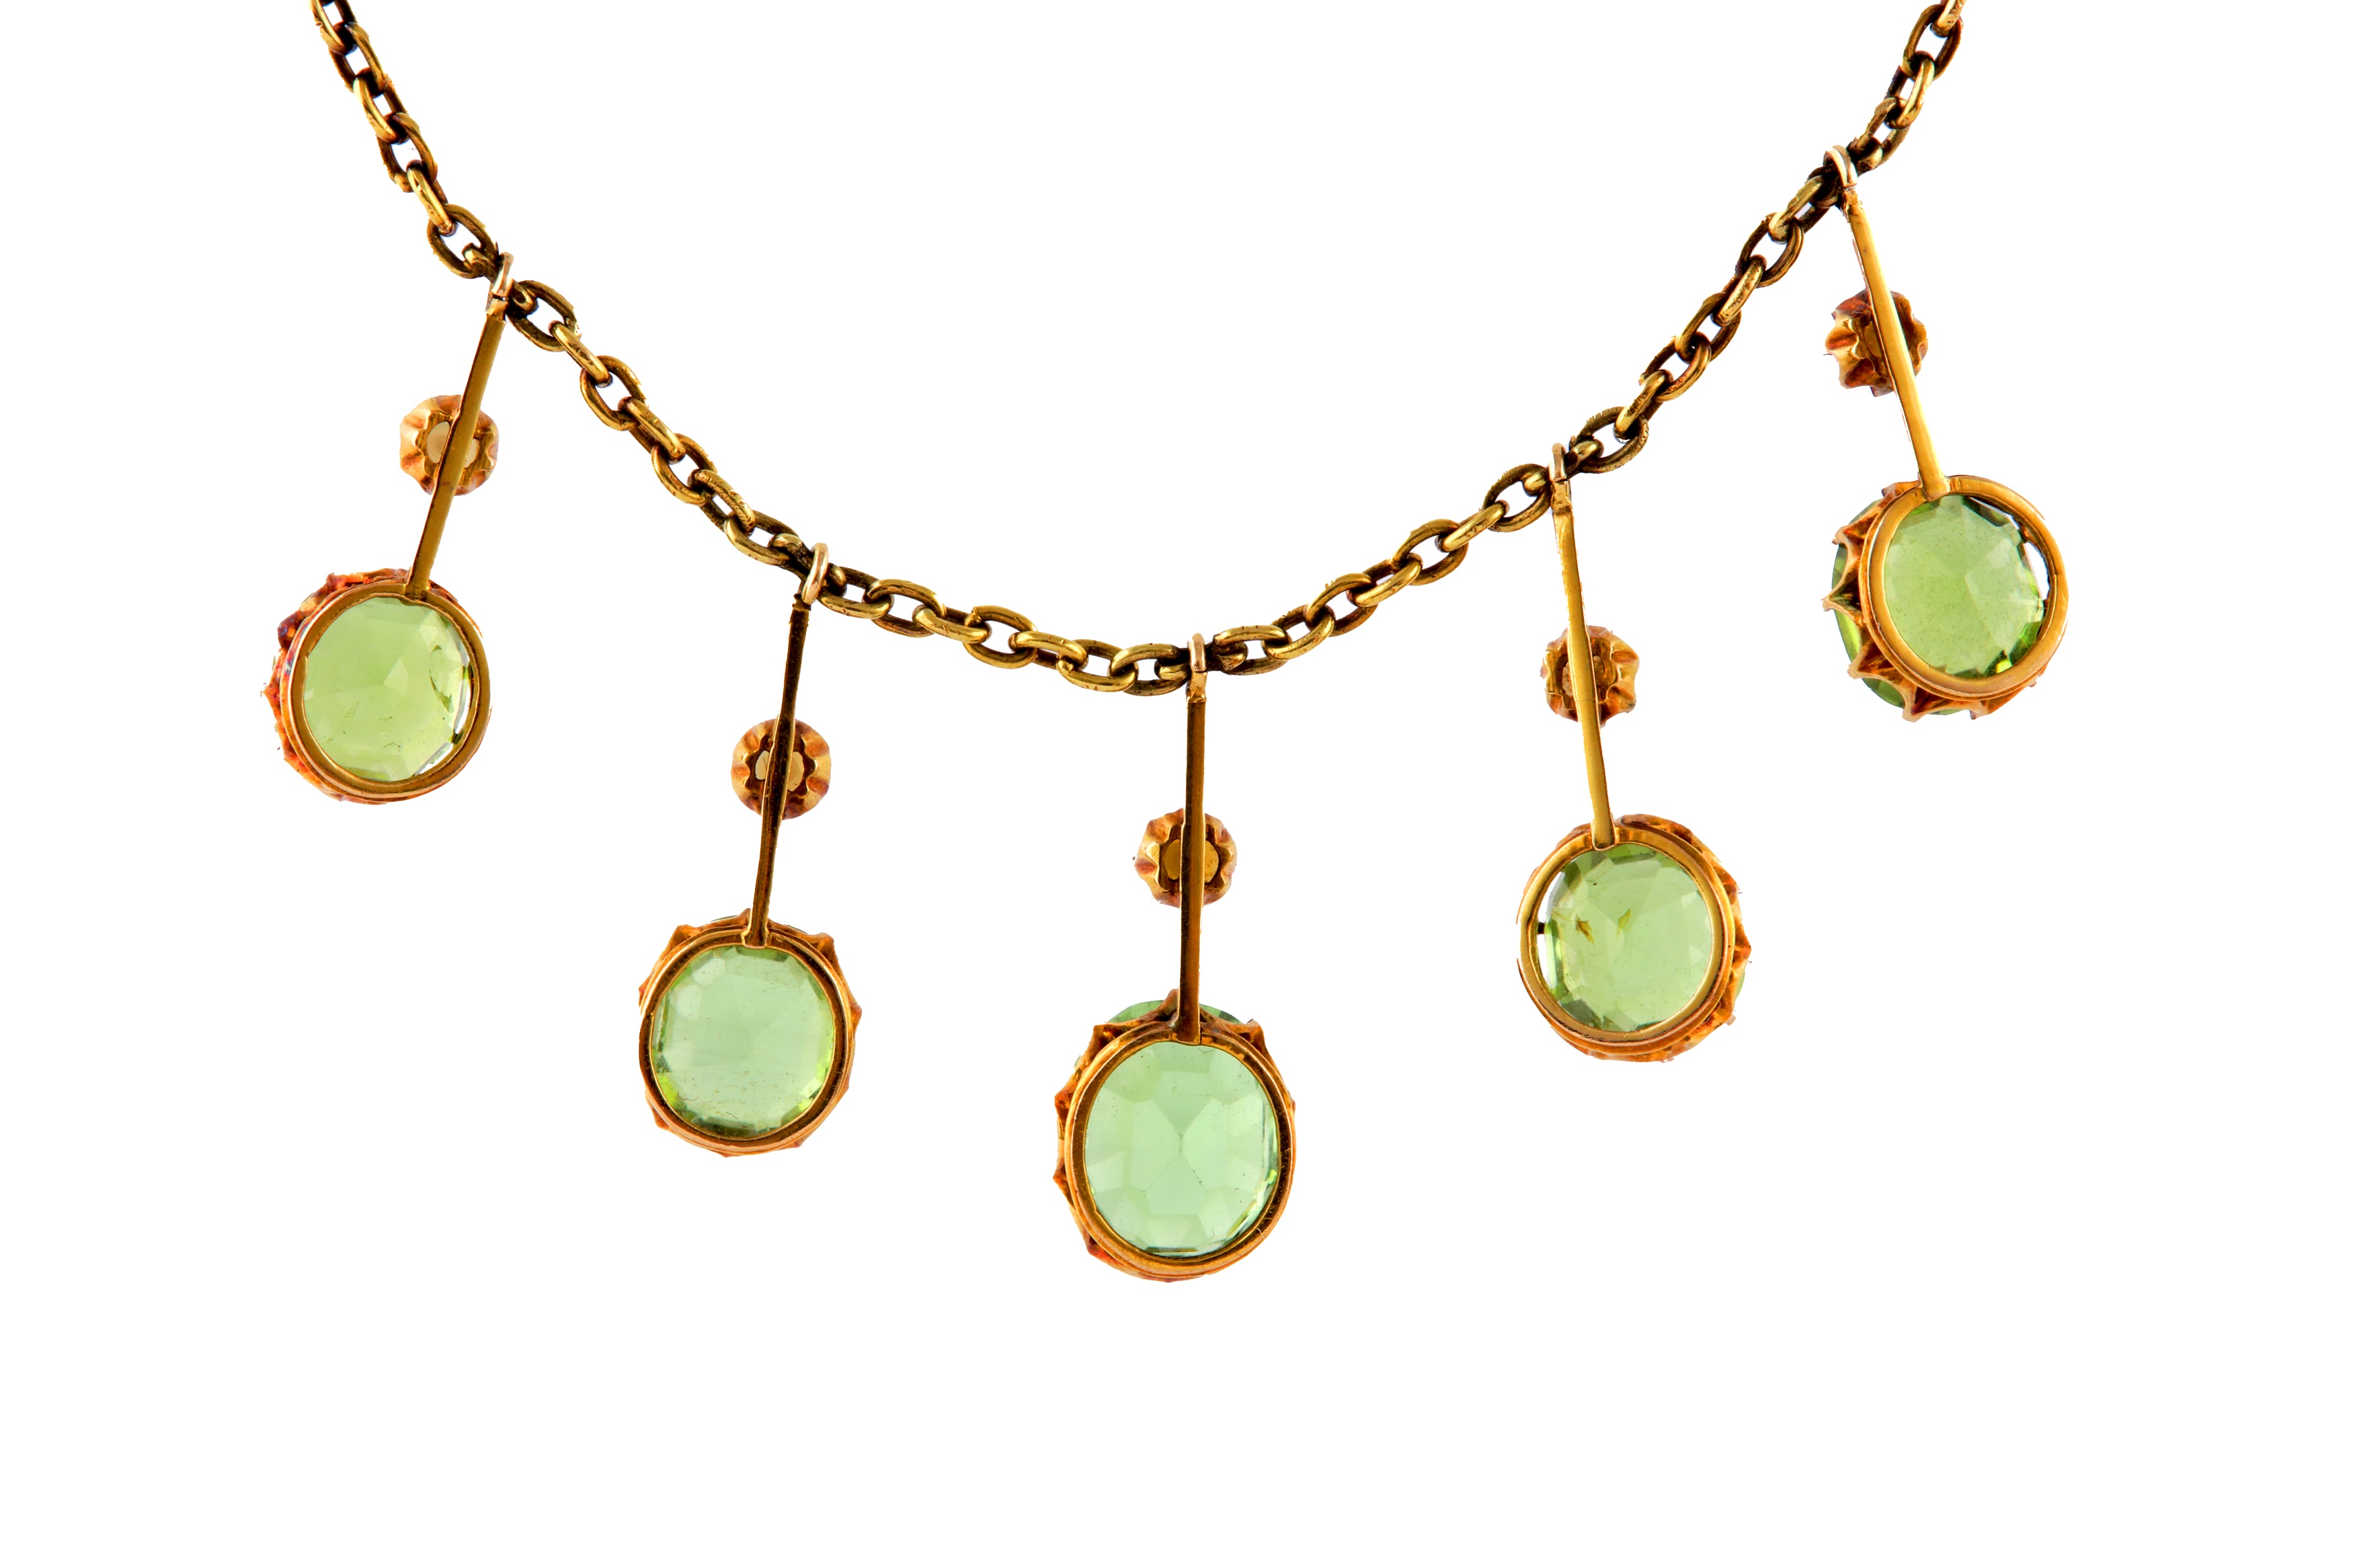 A PERIDOT AND SEED PEARL NECKLACE AND EARRING SUITE - Image 5 of 6